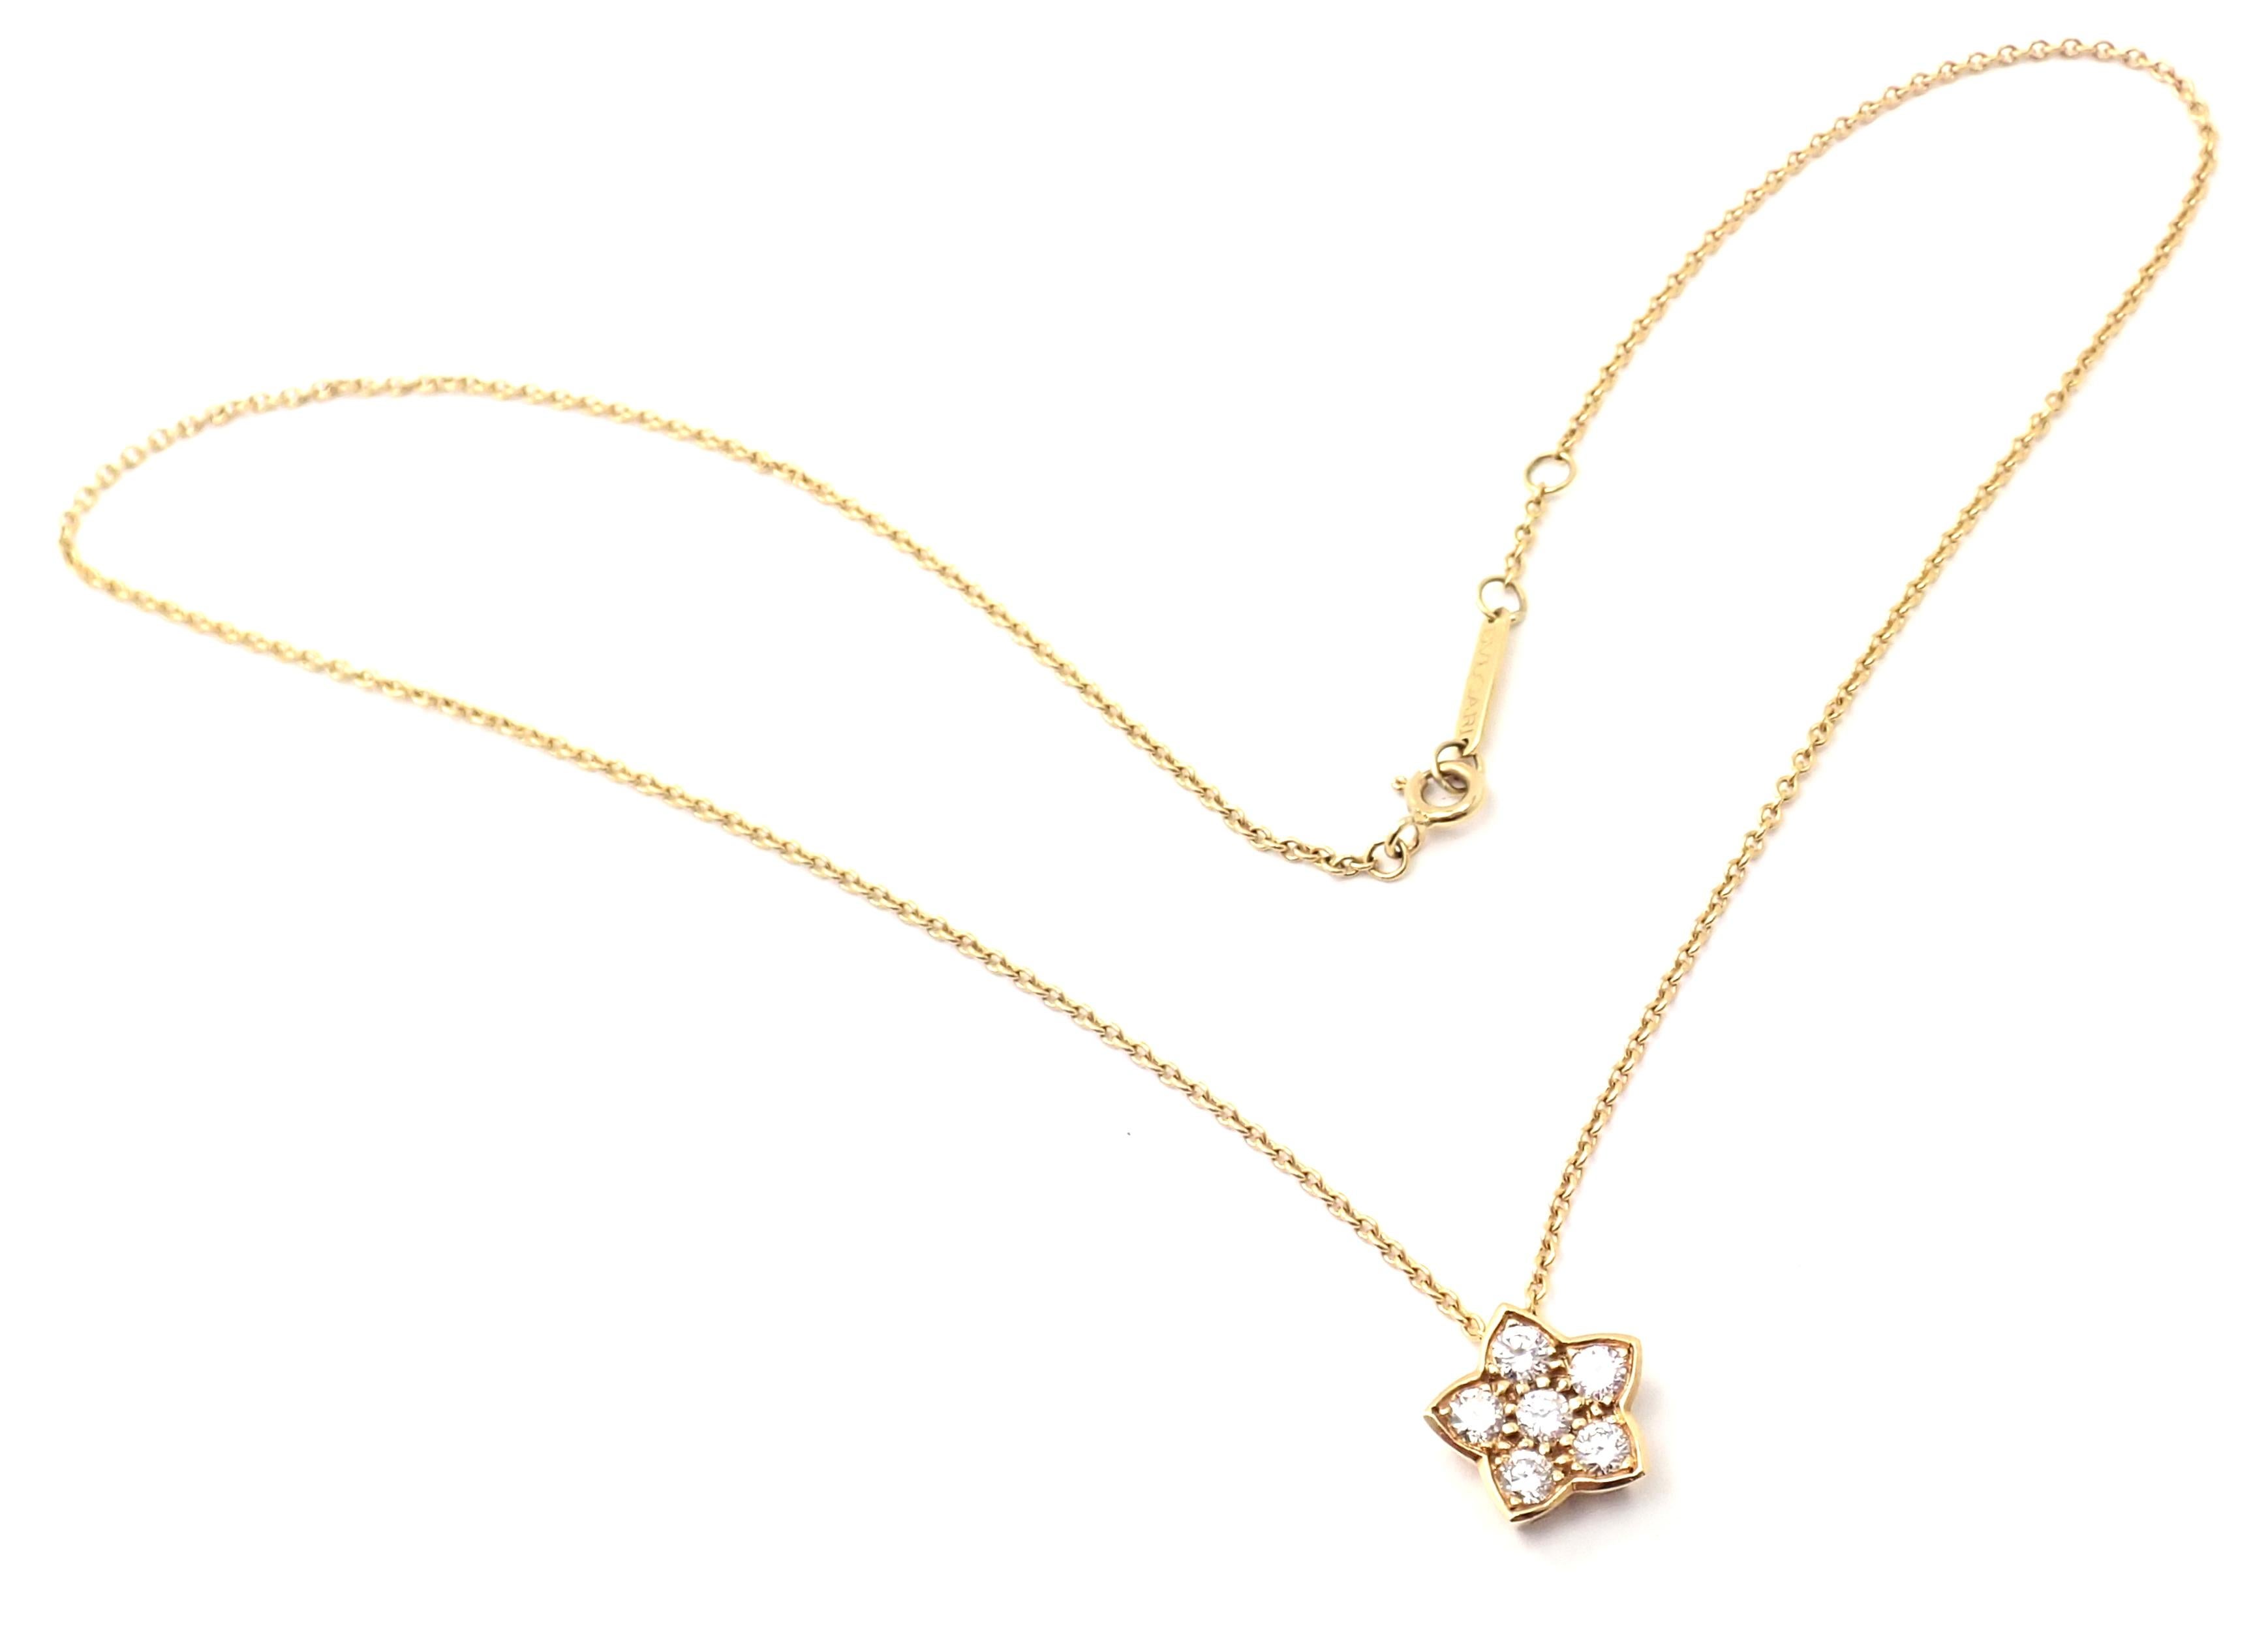 18k Yellow Gold Diamond Flower Pendant Necklace by Bulgari.  
With 6 round brilliant cut diamonds VS1 clarity G color total weight approximately .50ct
Details: Length: 16 1/4